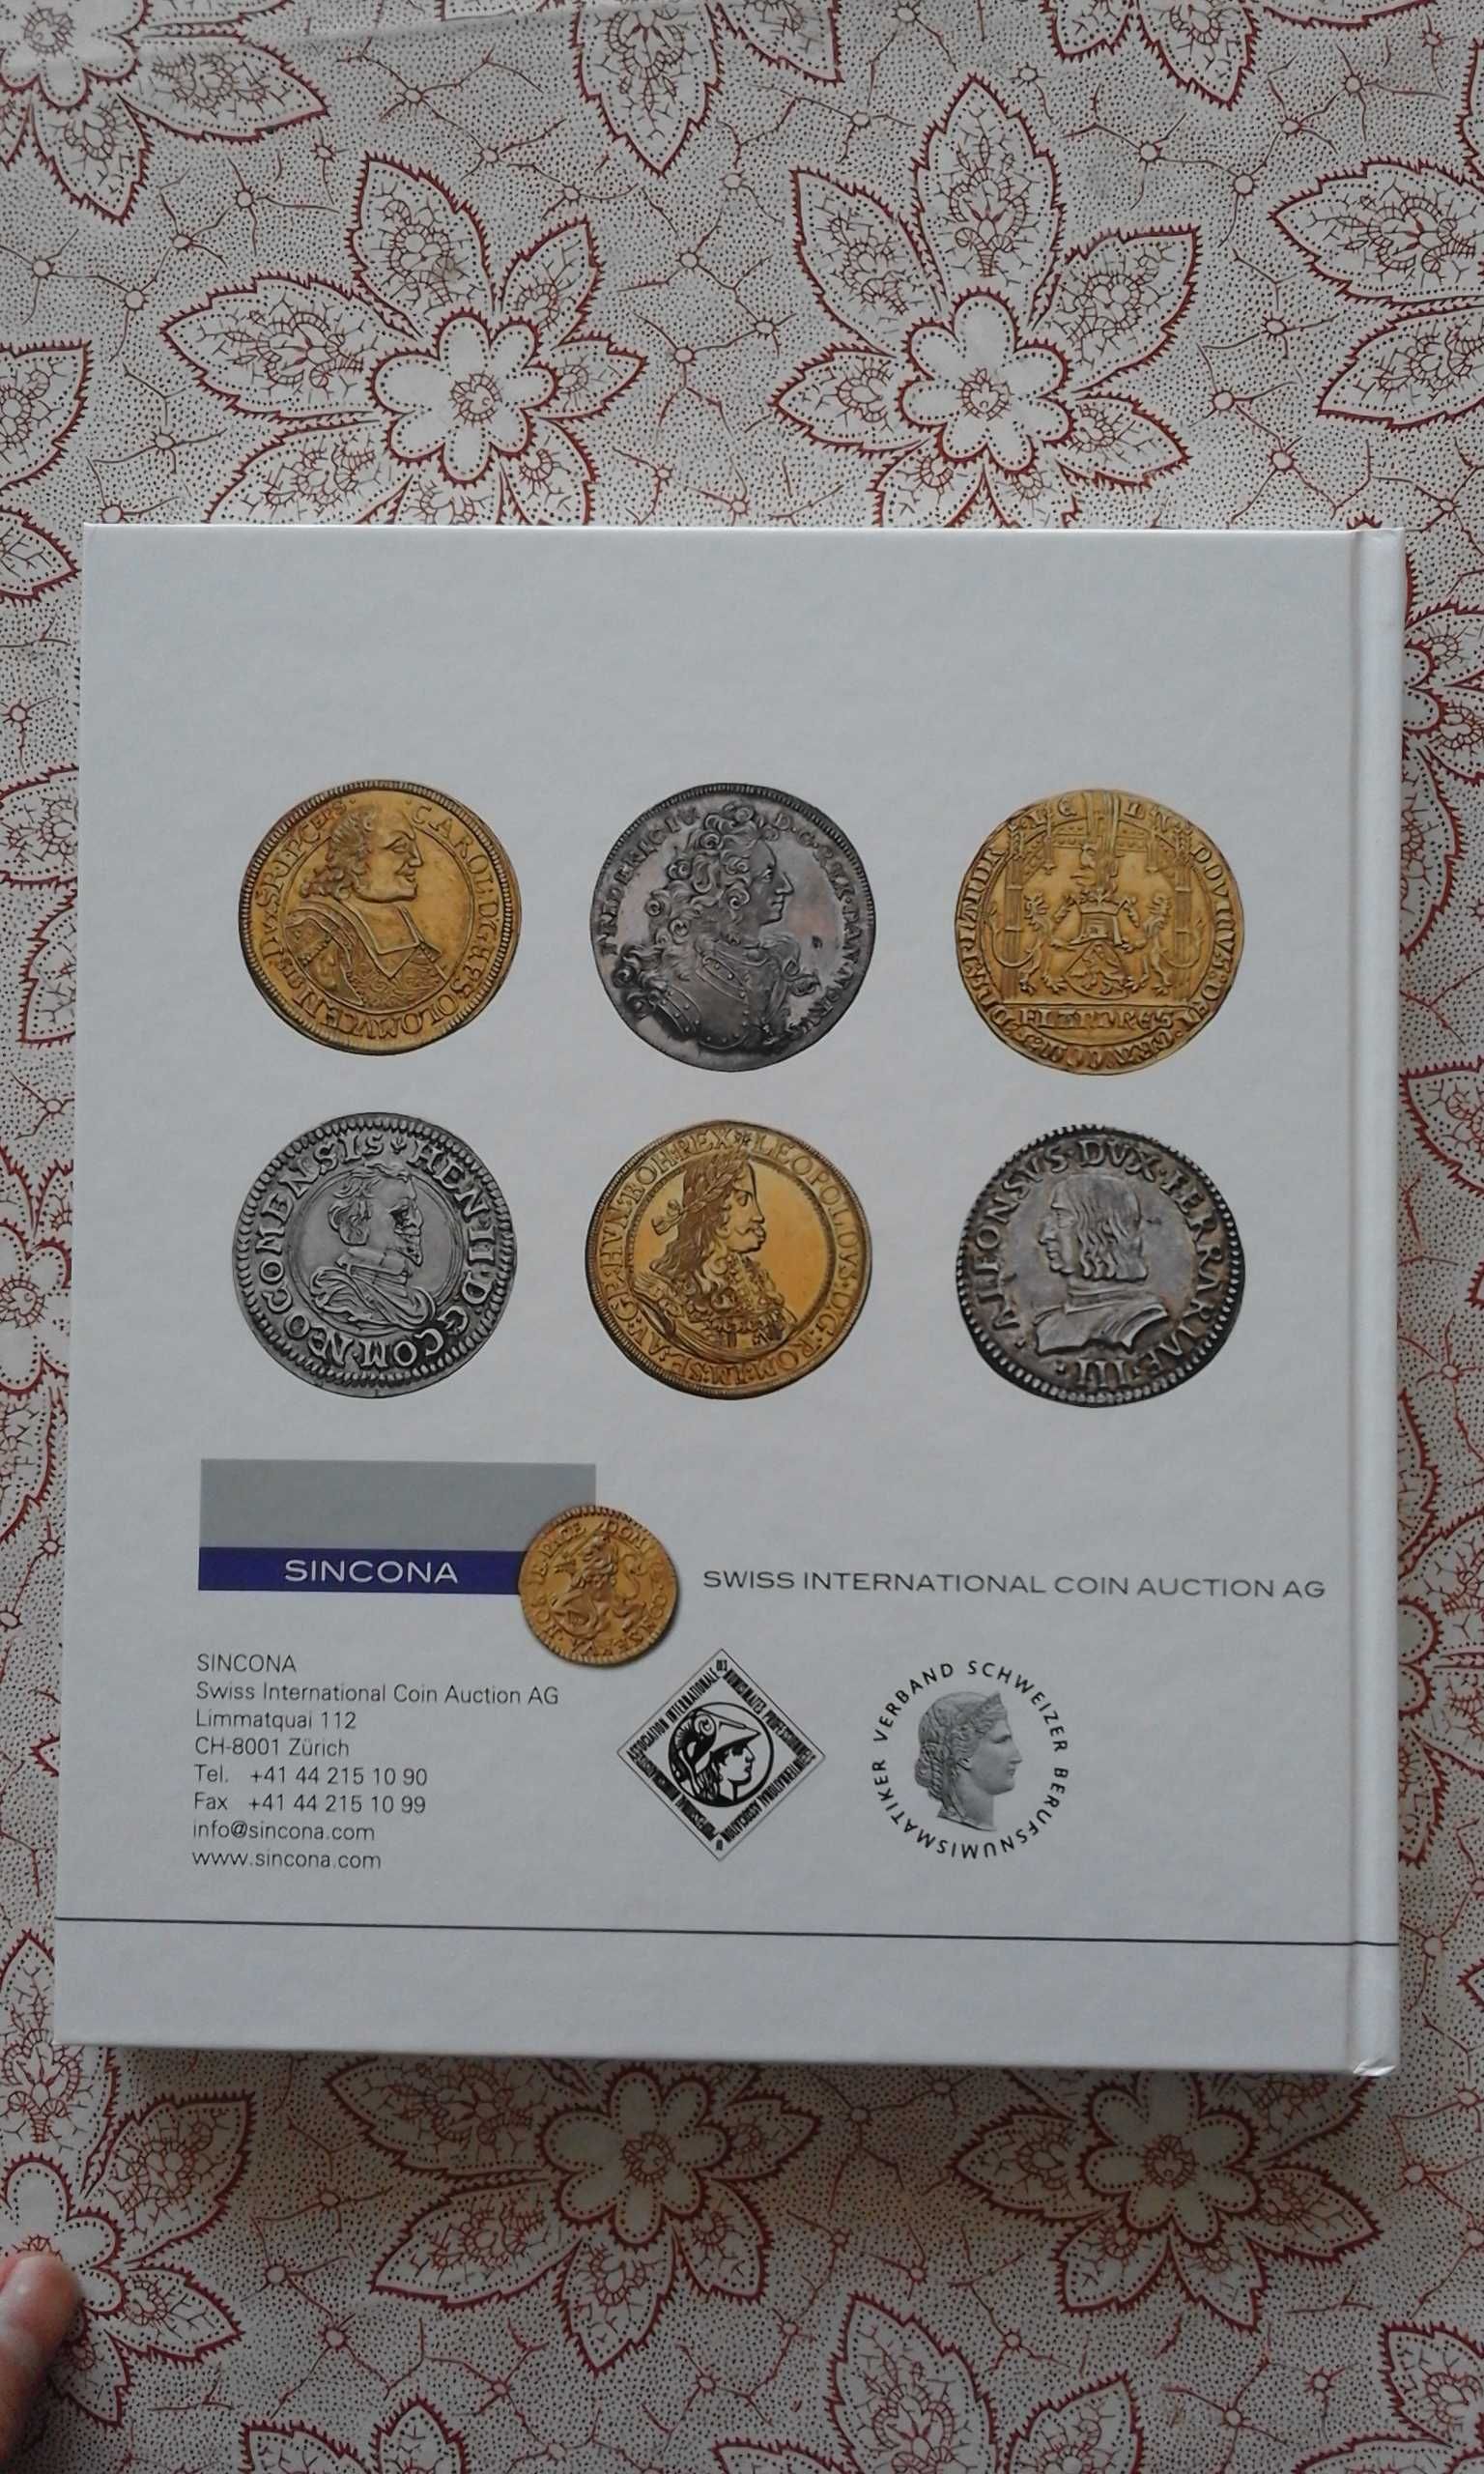 SINCONA Auction 76: Numismatic Rarities and Masterpieces / 17 May 2022